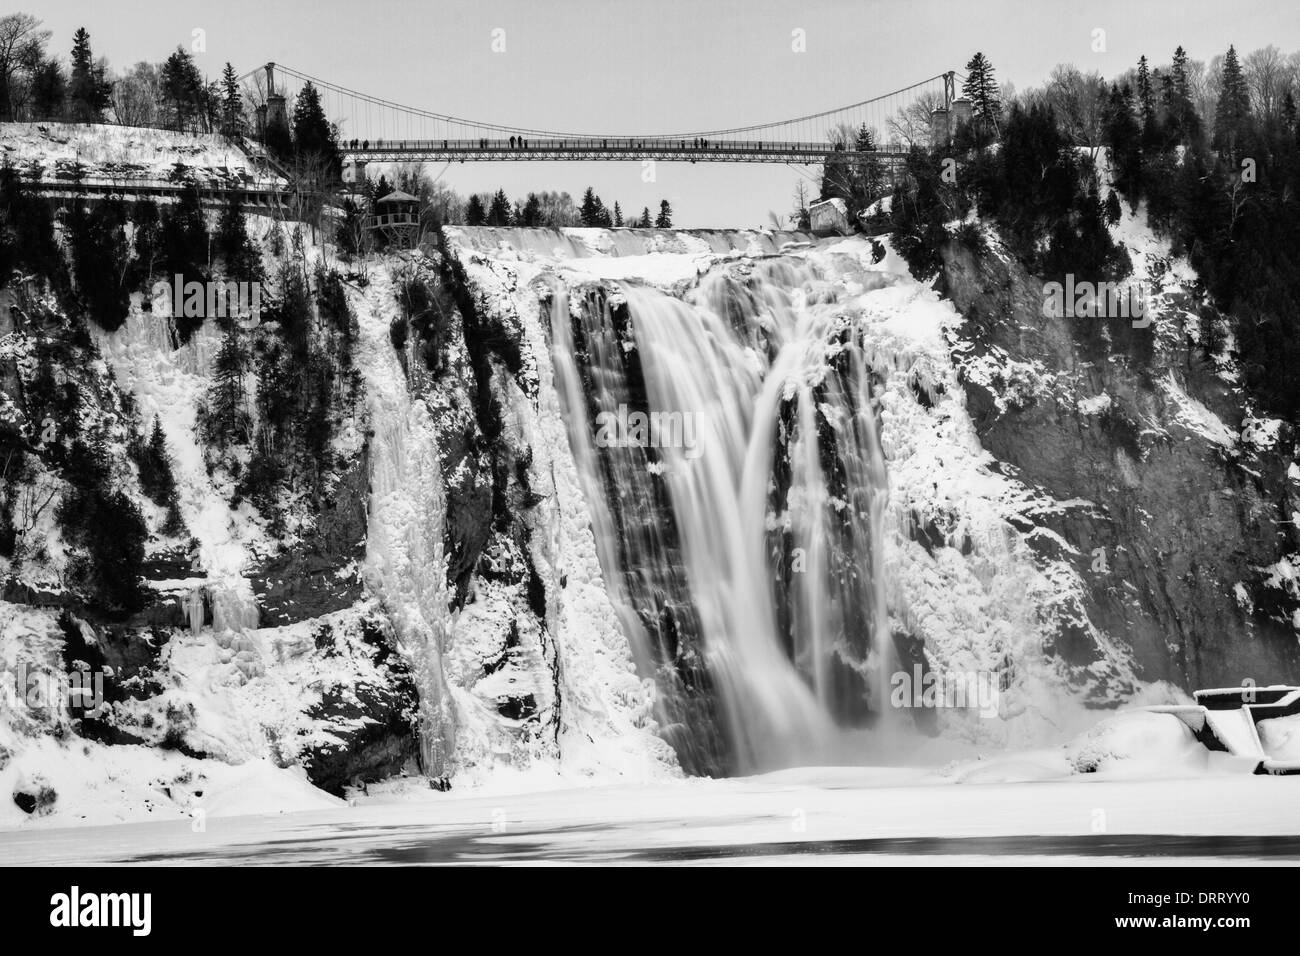 Chute Montmorency, Montmorency Falls, Quebec City, Canada. Converted to black and white. Stock Photo